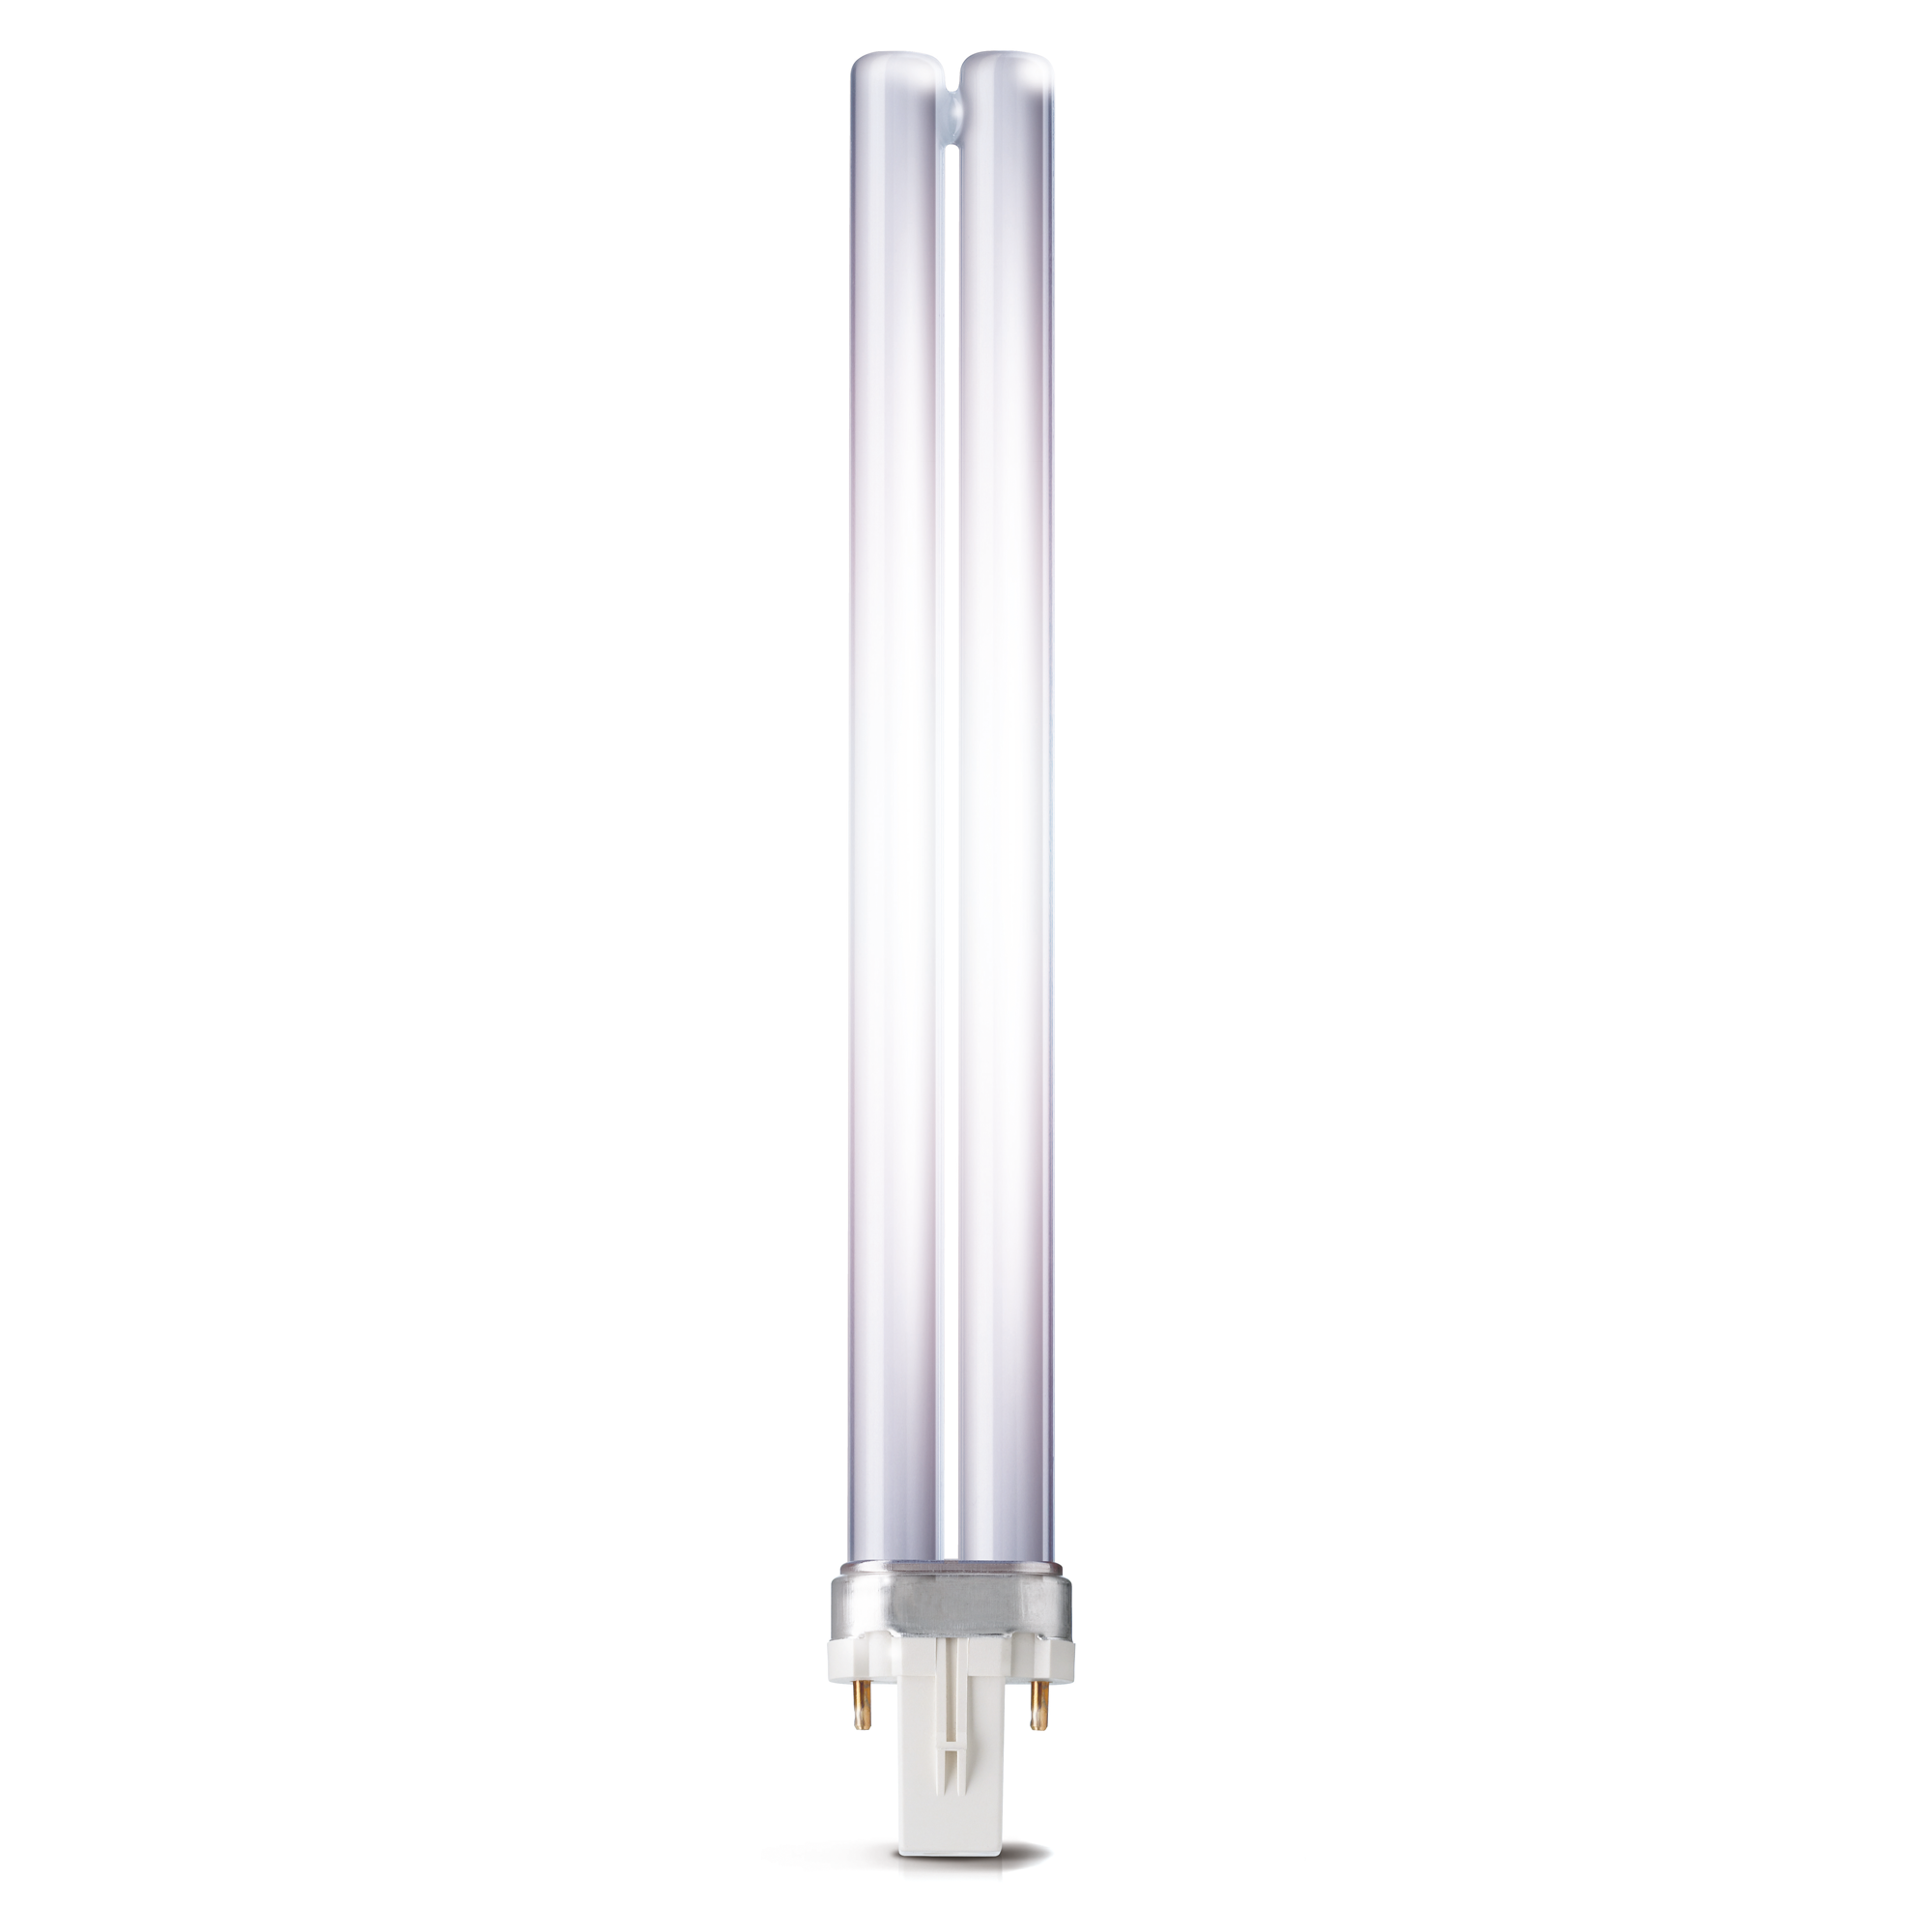 Energiesparlampe 'Longlife' warmweiß PL-S 9 W + product picture